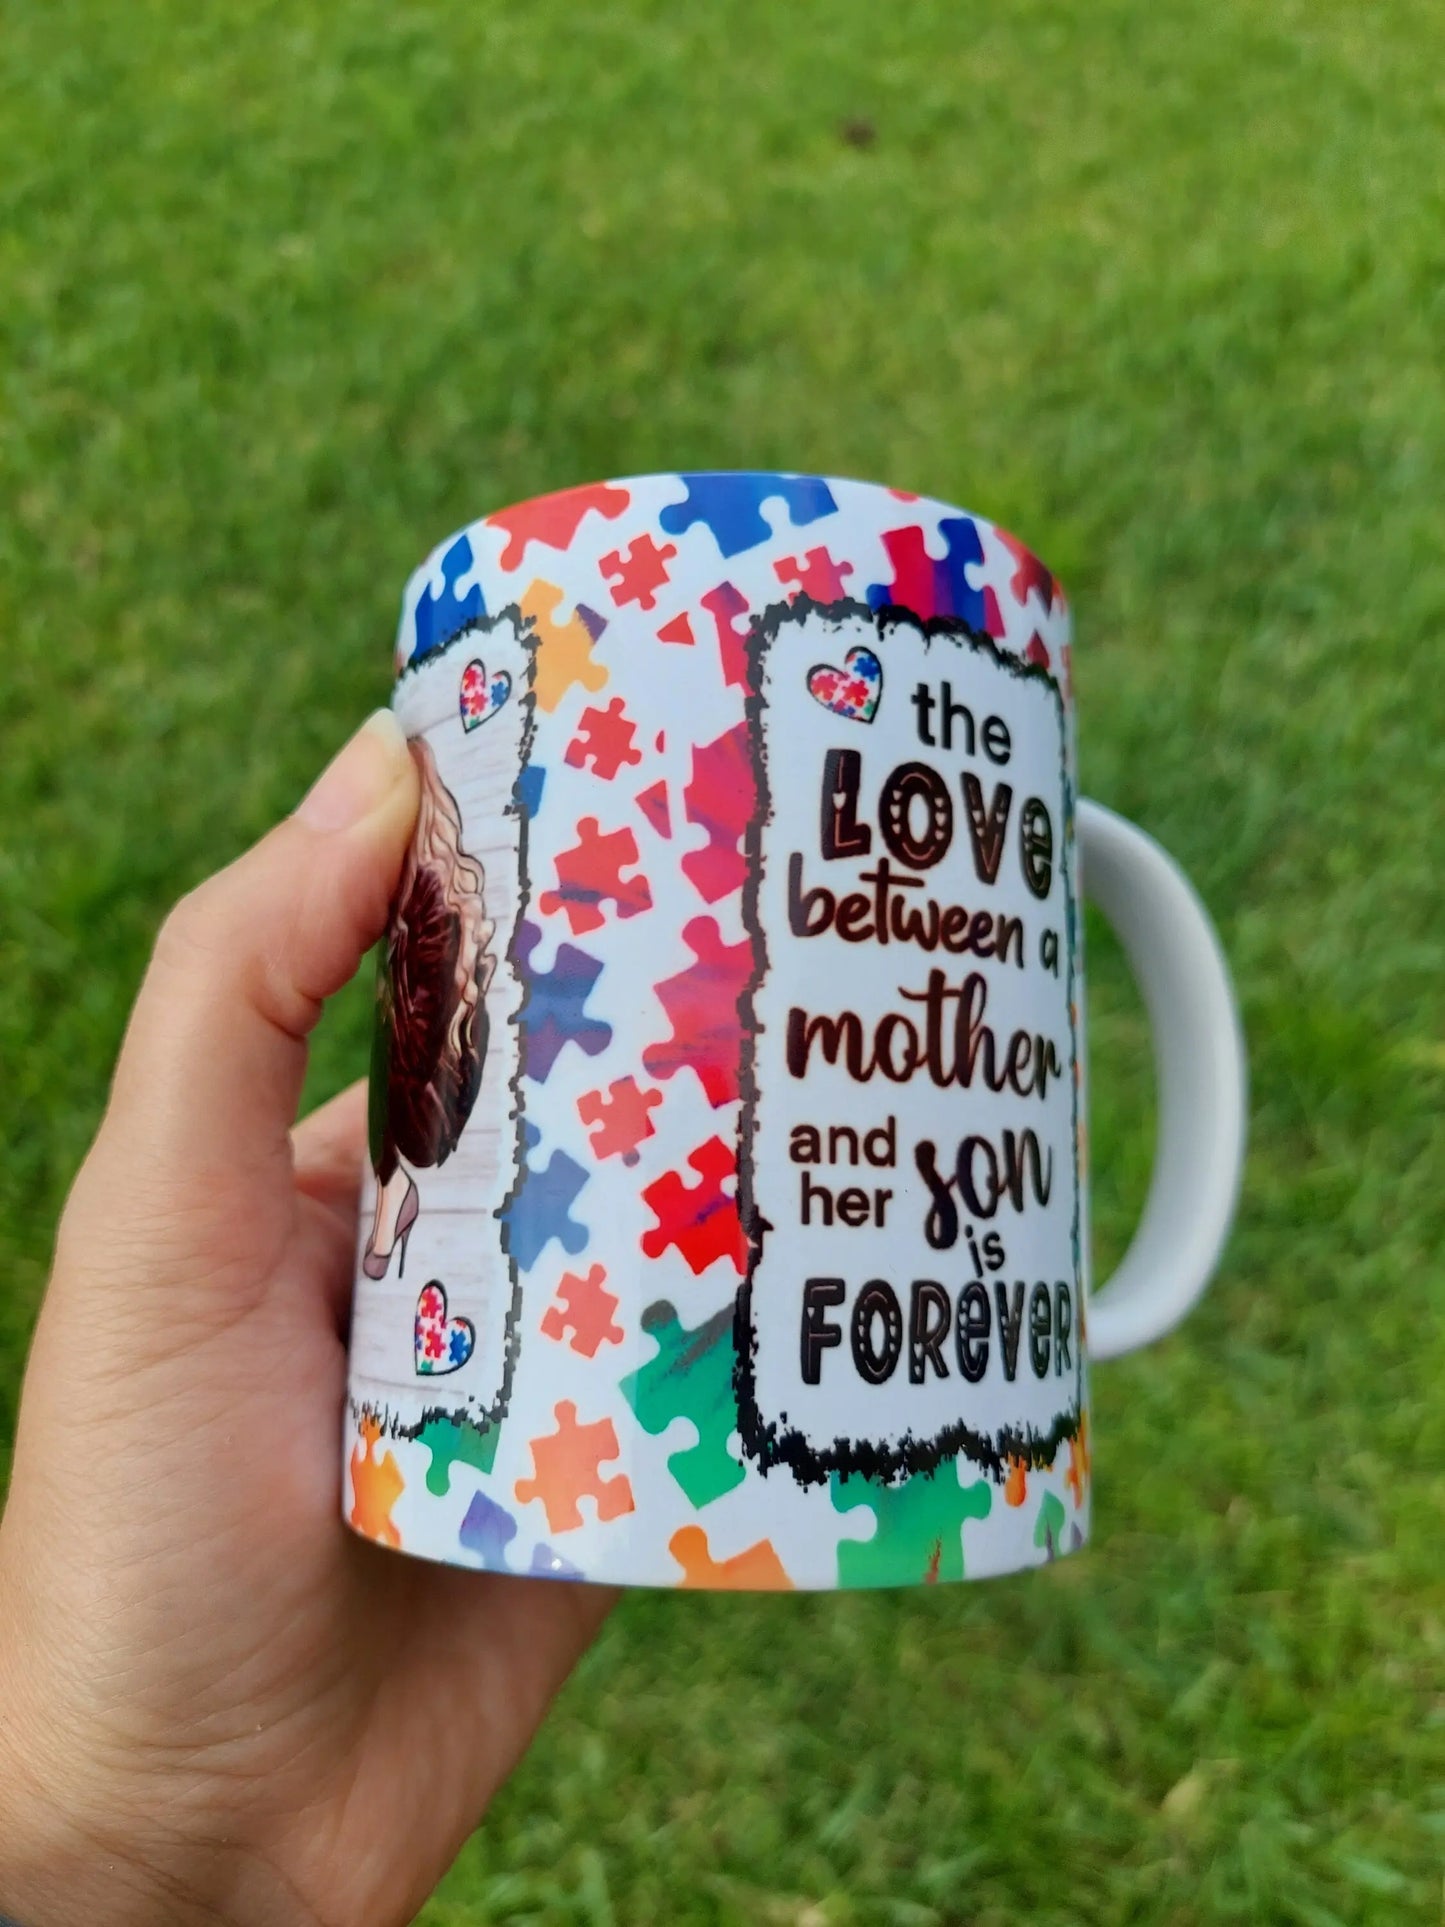 The Love Between A Mother and Her Son Mug